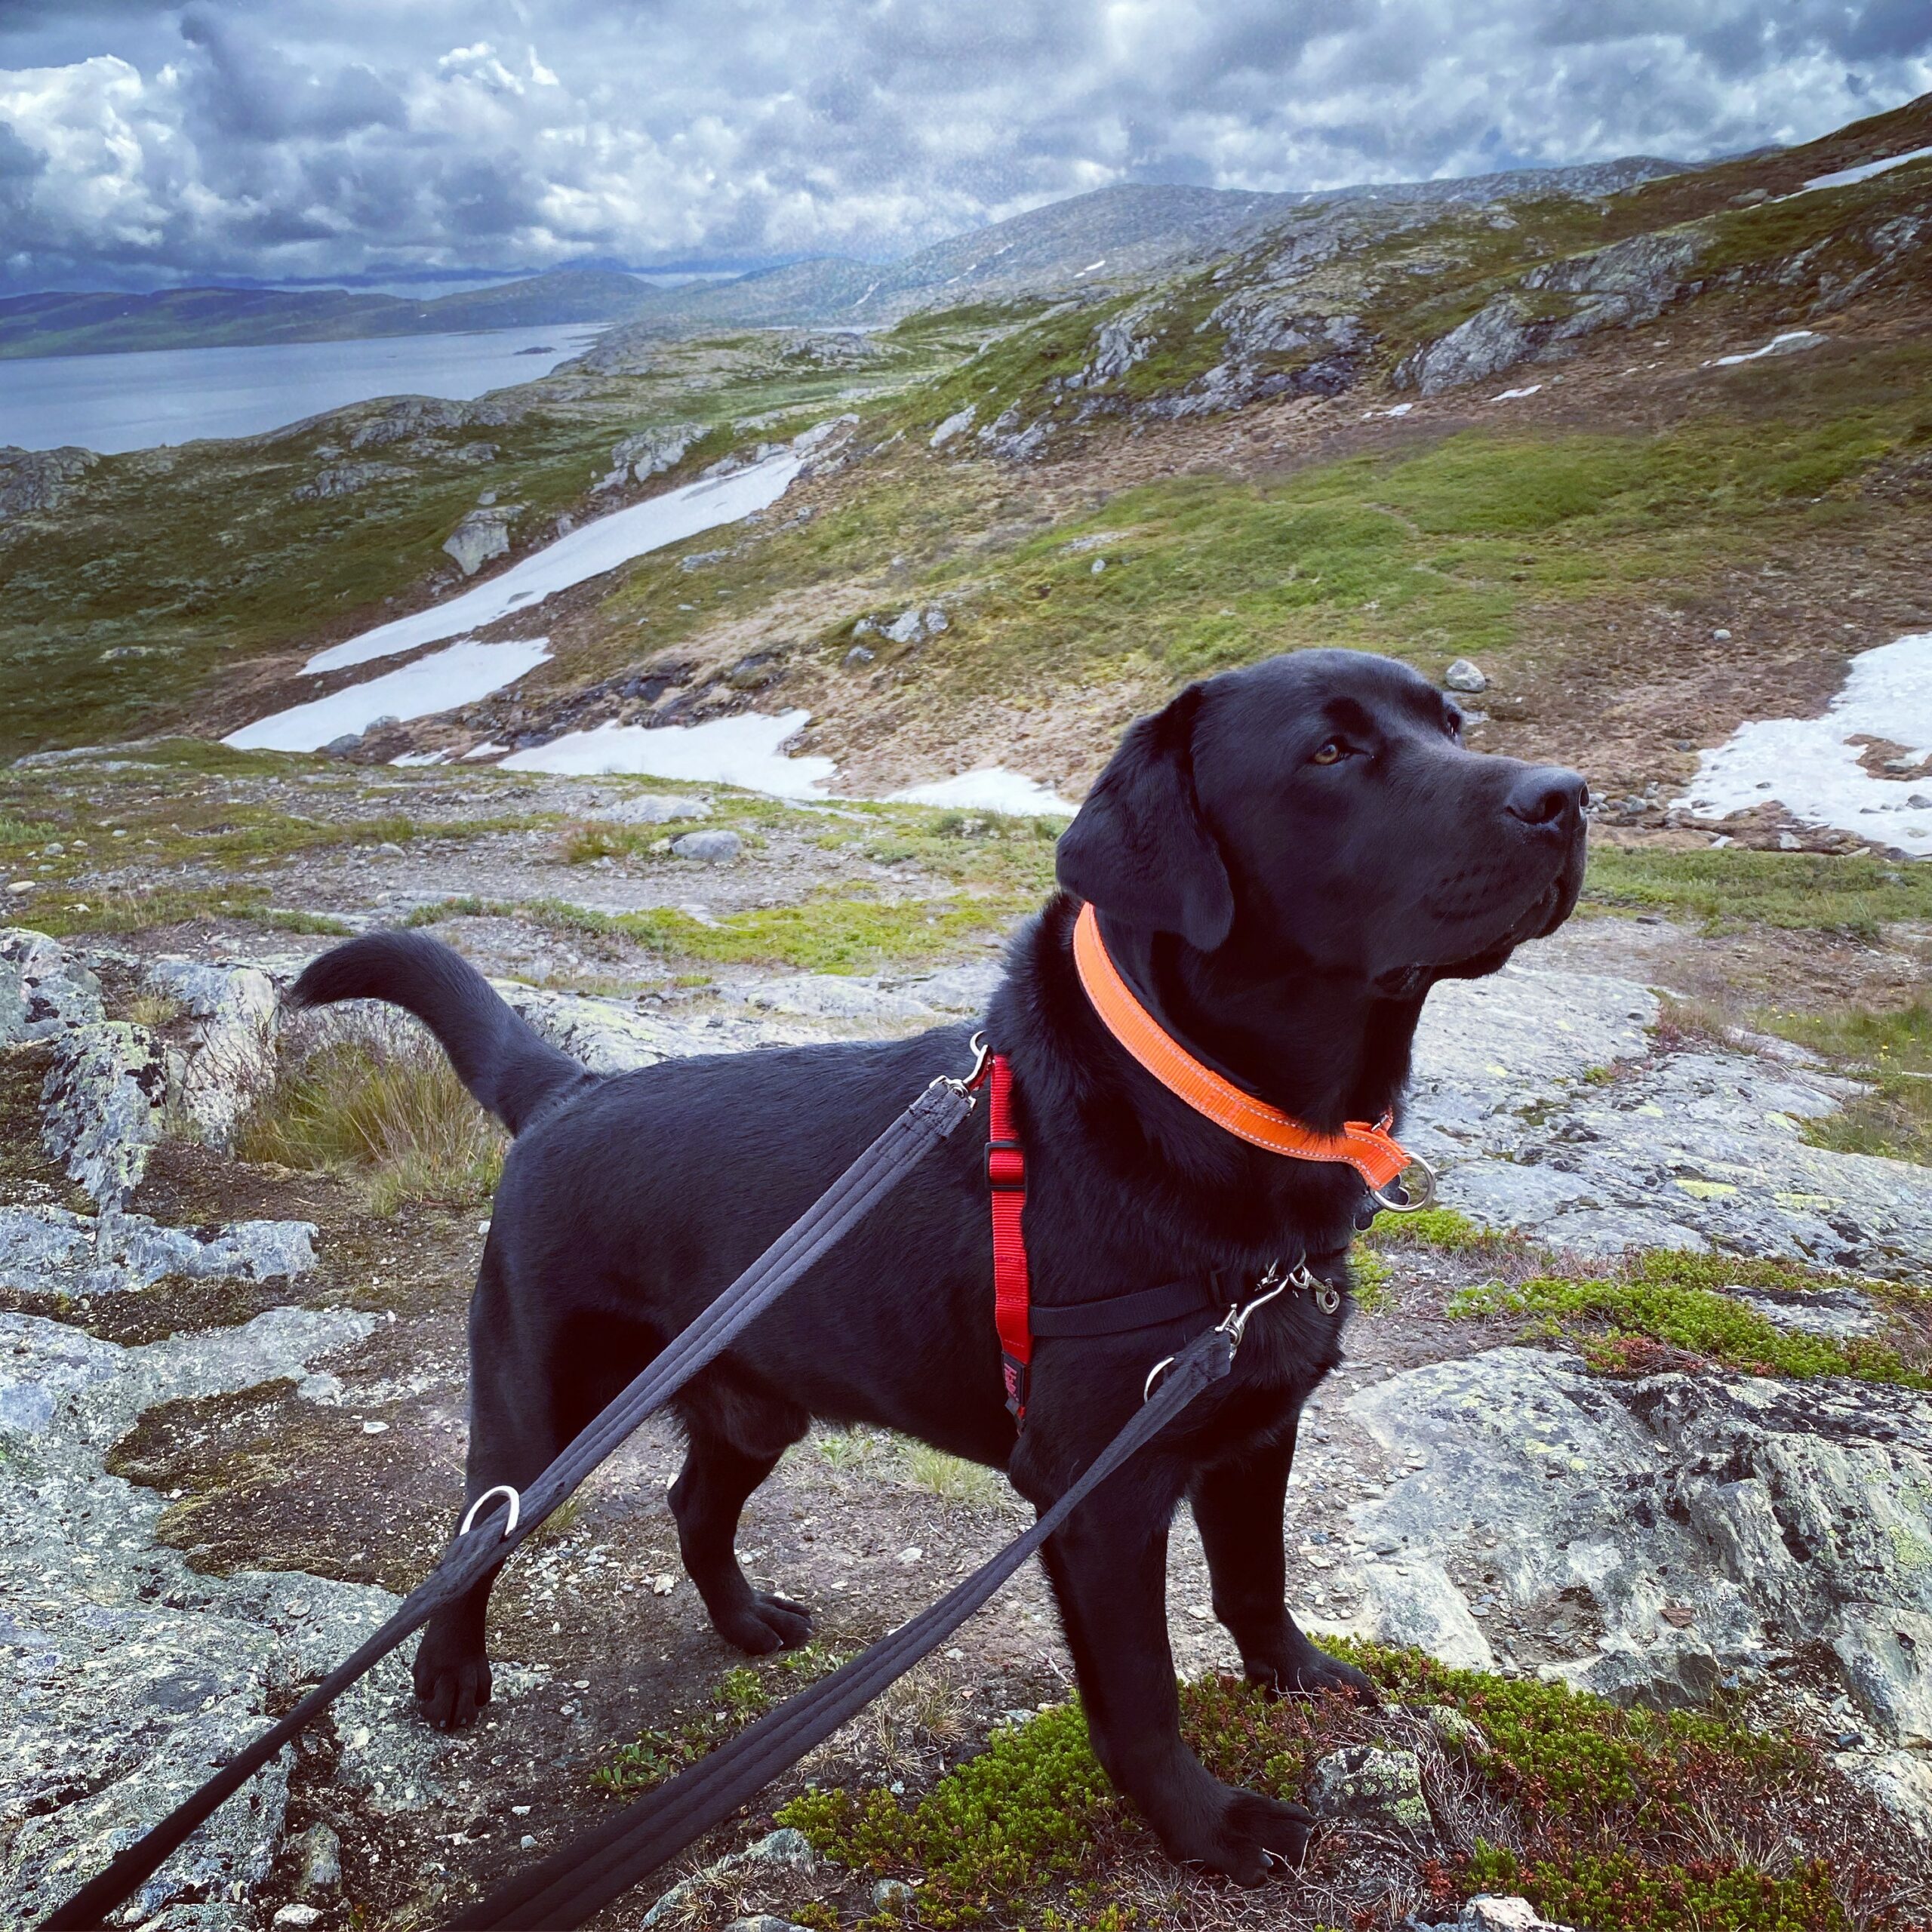 Black lab looking majestic on mountain with harness and double-ended lead